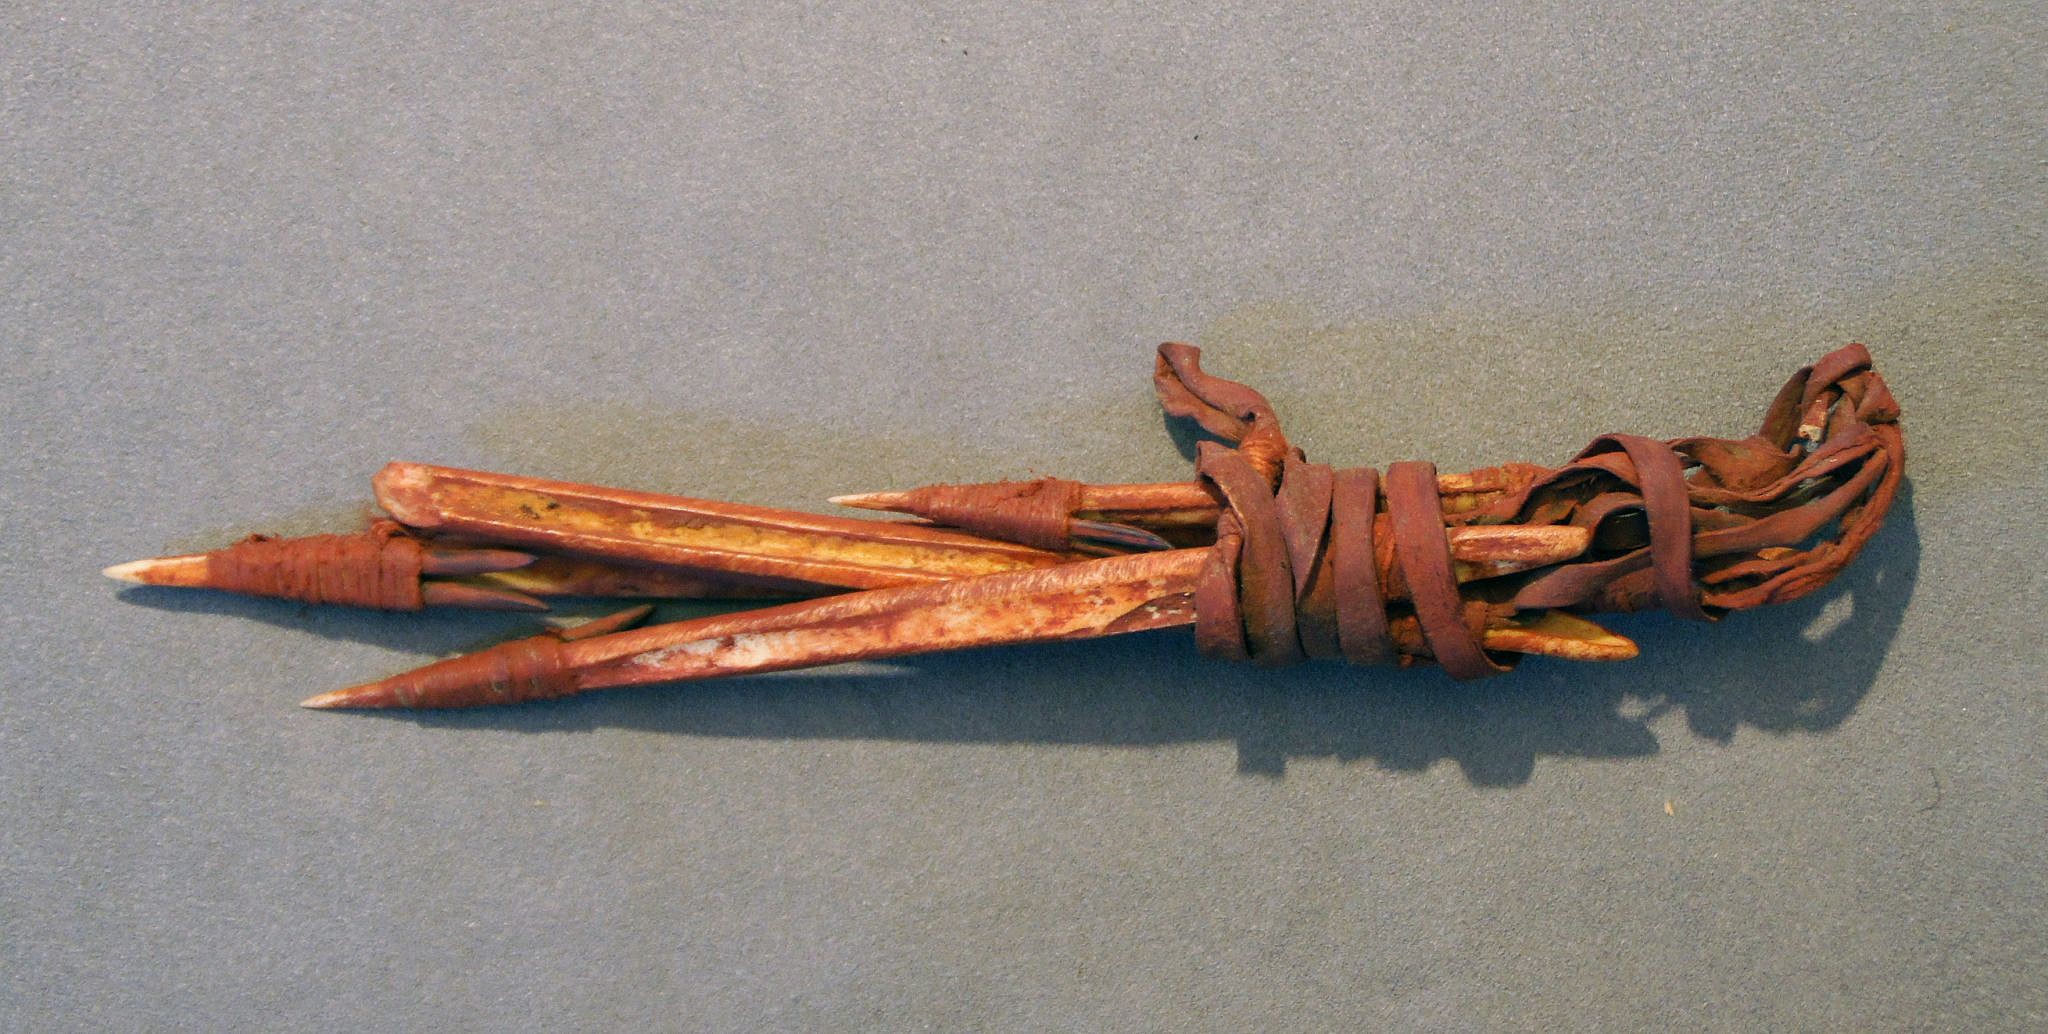 Chile, Four Bone and Thorn Harpoon Forepoints Lashed Together with Leather
Small harpoon forepoints covered in red pigment and lashed with leather.  This bundle was buried for the afterlife and was probably a fisherman's set.
Media: Bone
Dimensions: Length: 8"
n6039